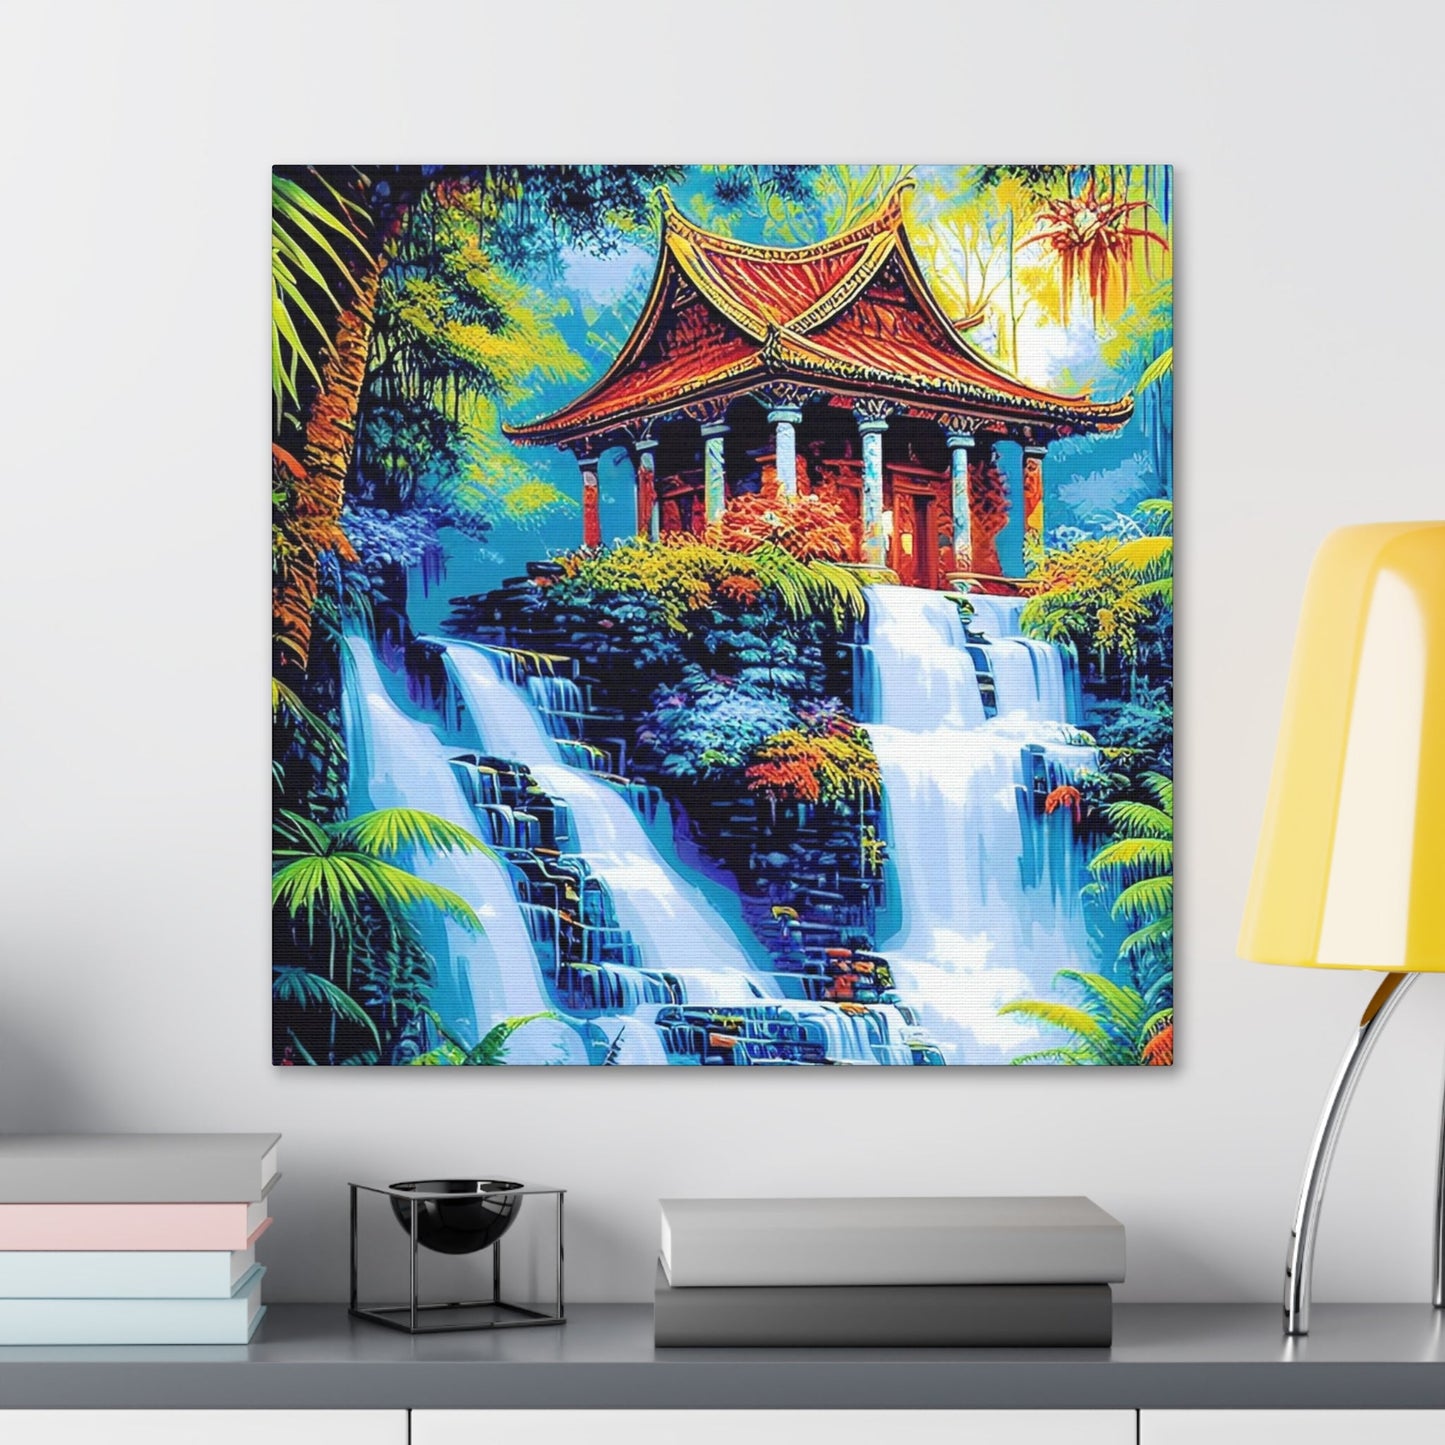 CrazyYetiClothing, CYC, The Temple (Square Canvas Gallery Wrap), Canvas